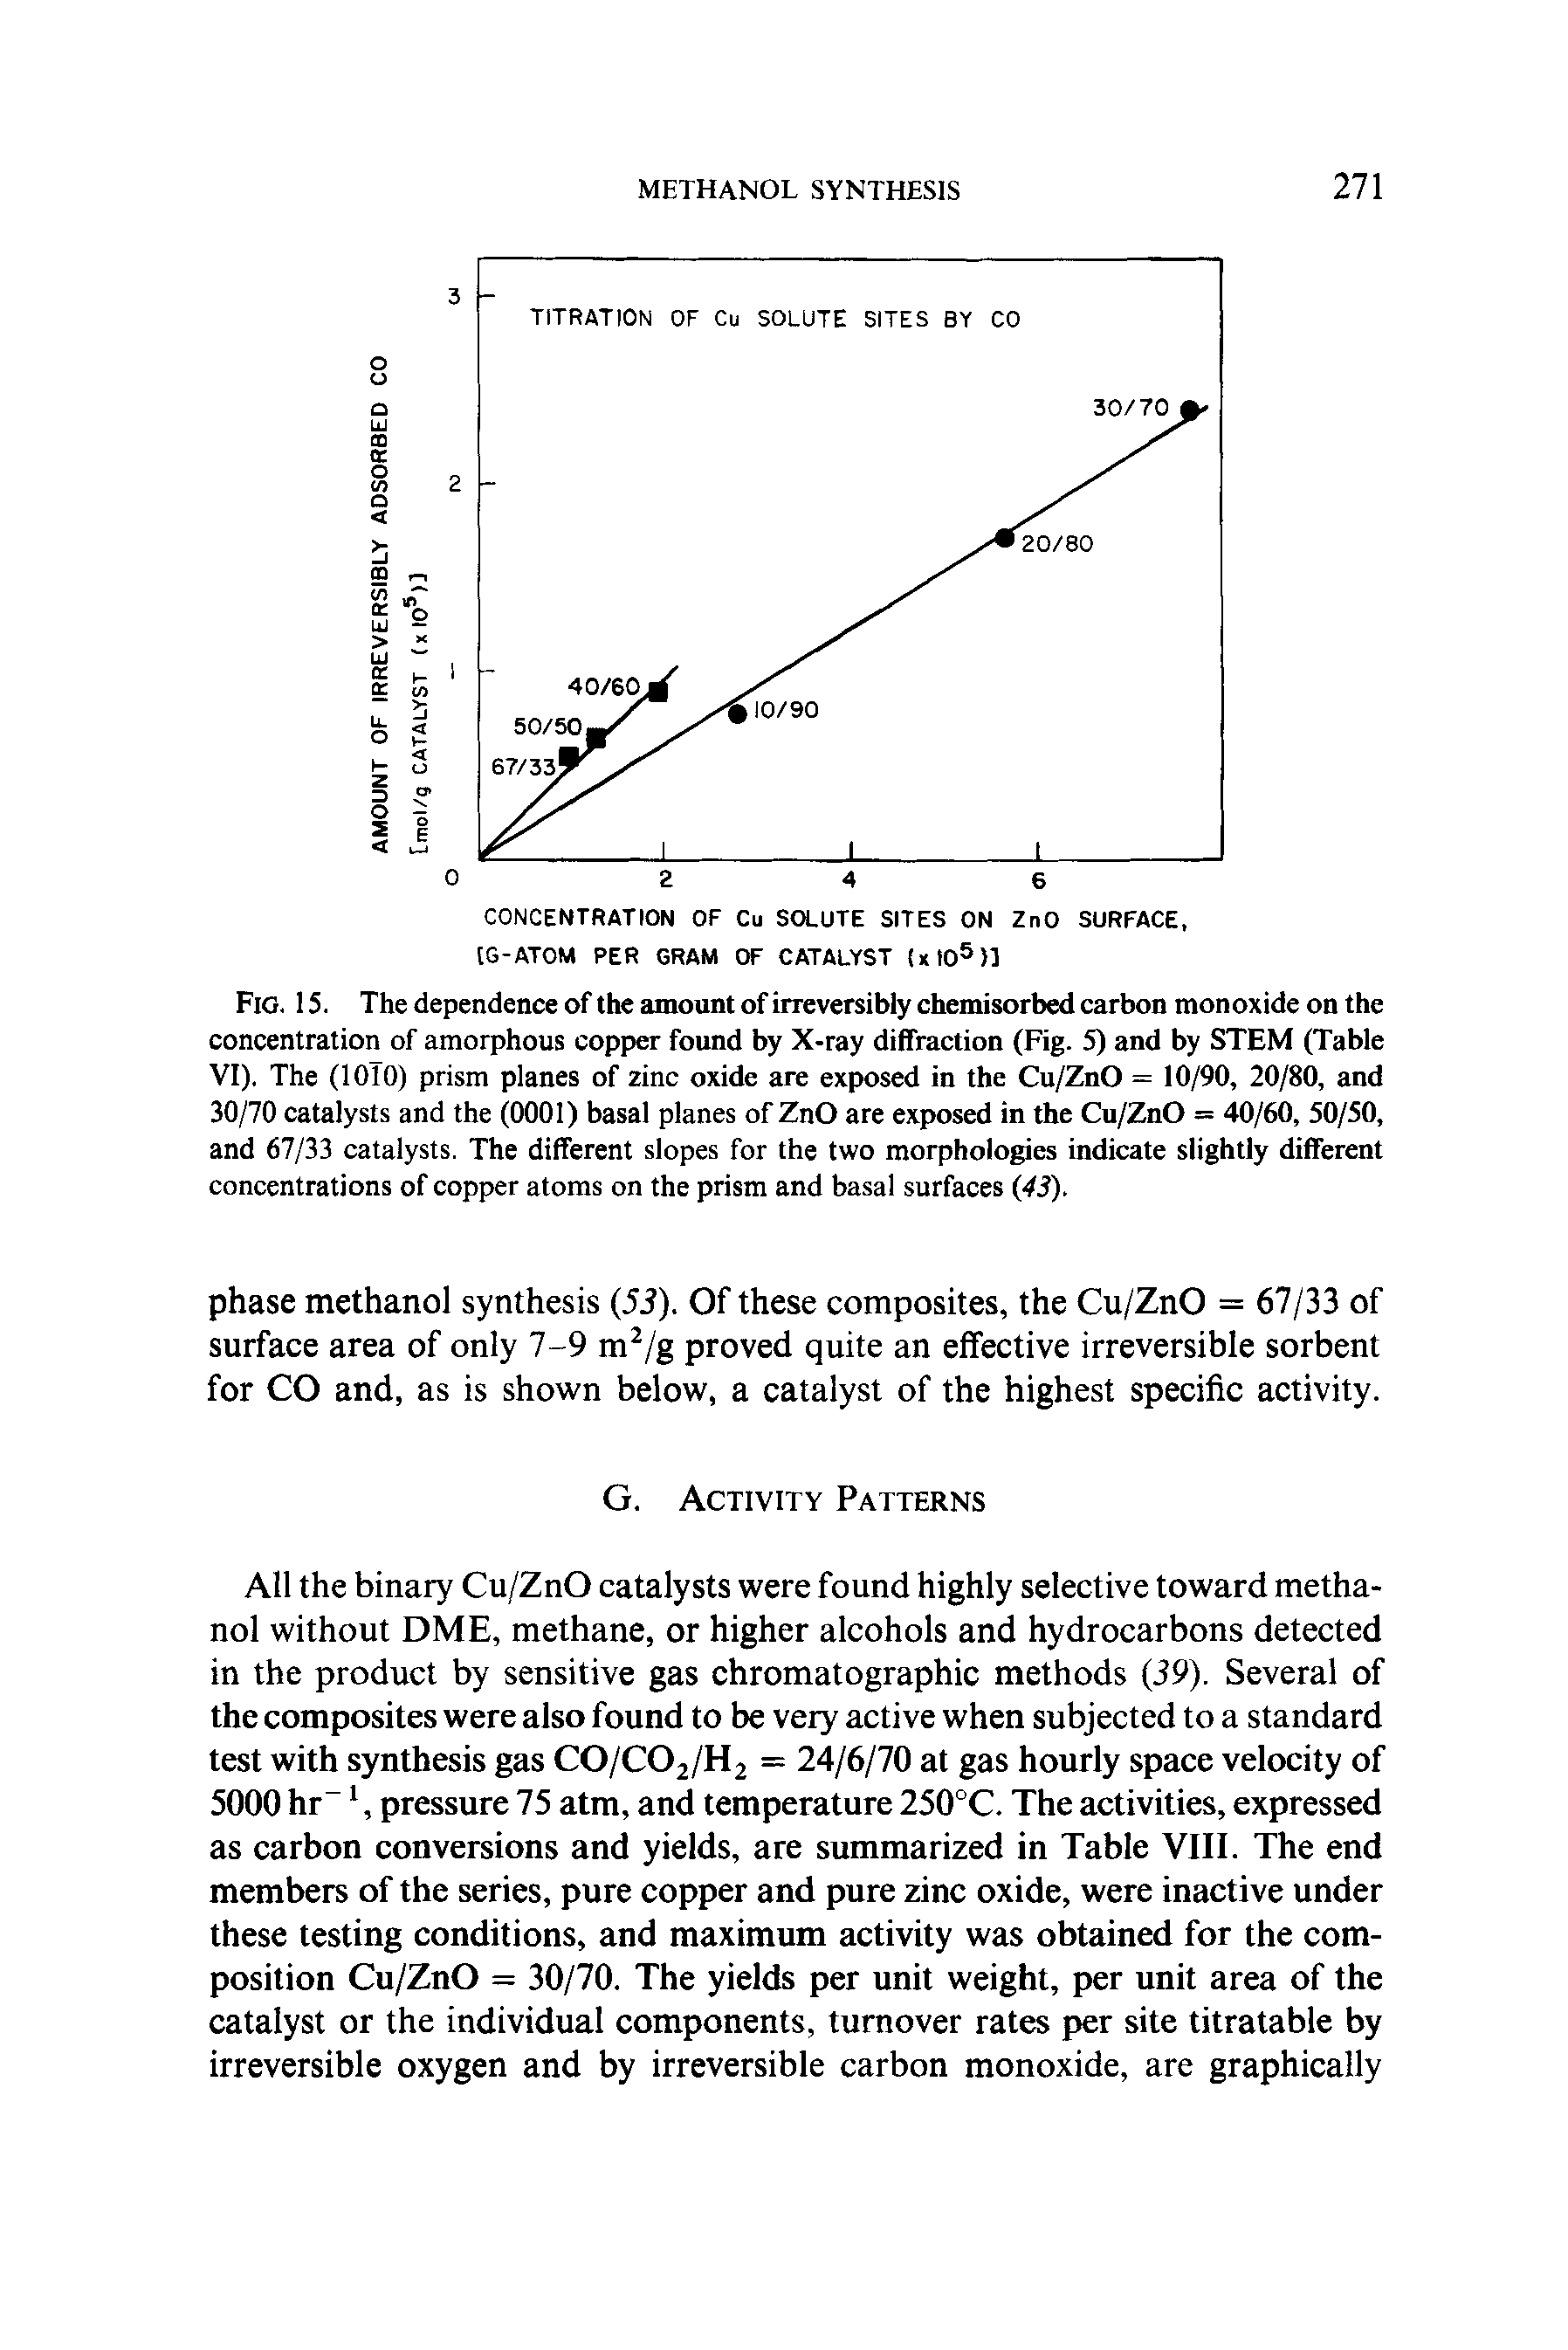 Fig. 15. The dependence of the amount of irreversibly chemisorbed carbon monoxide on the concentration of amorphous copper found by X-ray diffraction (Fig. 5) and by STEM (Table VI). The (10T0) prism planes of zinc oxide are exposed in the Cu/ZnO = 10/90, 20/80, and 30/70 catalysts and the (0001) basal planes of ZnO are exposed in the Cu/ZnO = 40/60, 50/50, and 67/33 catalysts. The different slopes for the two morphologies indicate slightly different concentrations of copper atoms on the prism and basal surfaces (43).